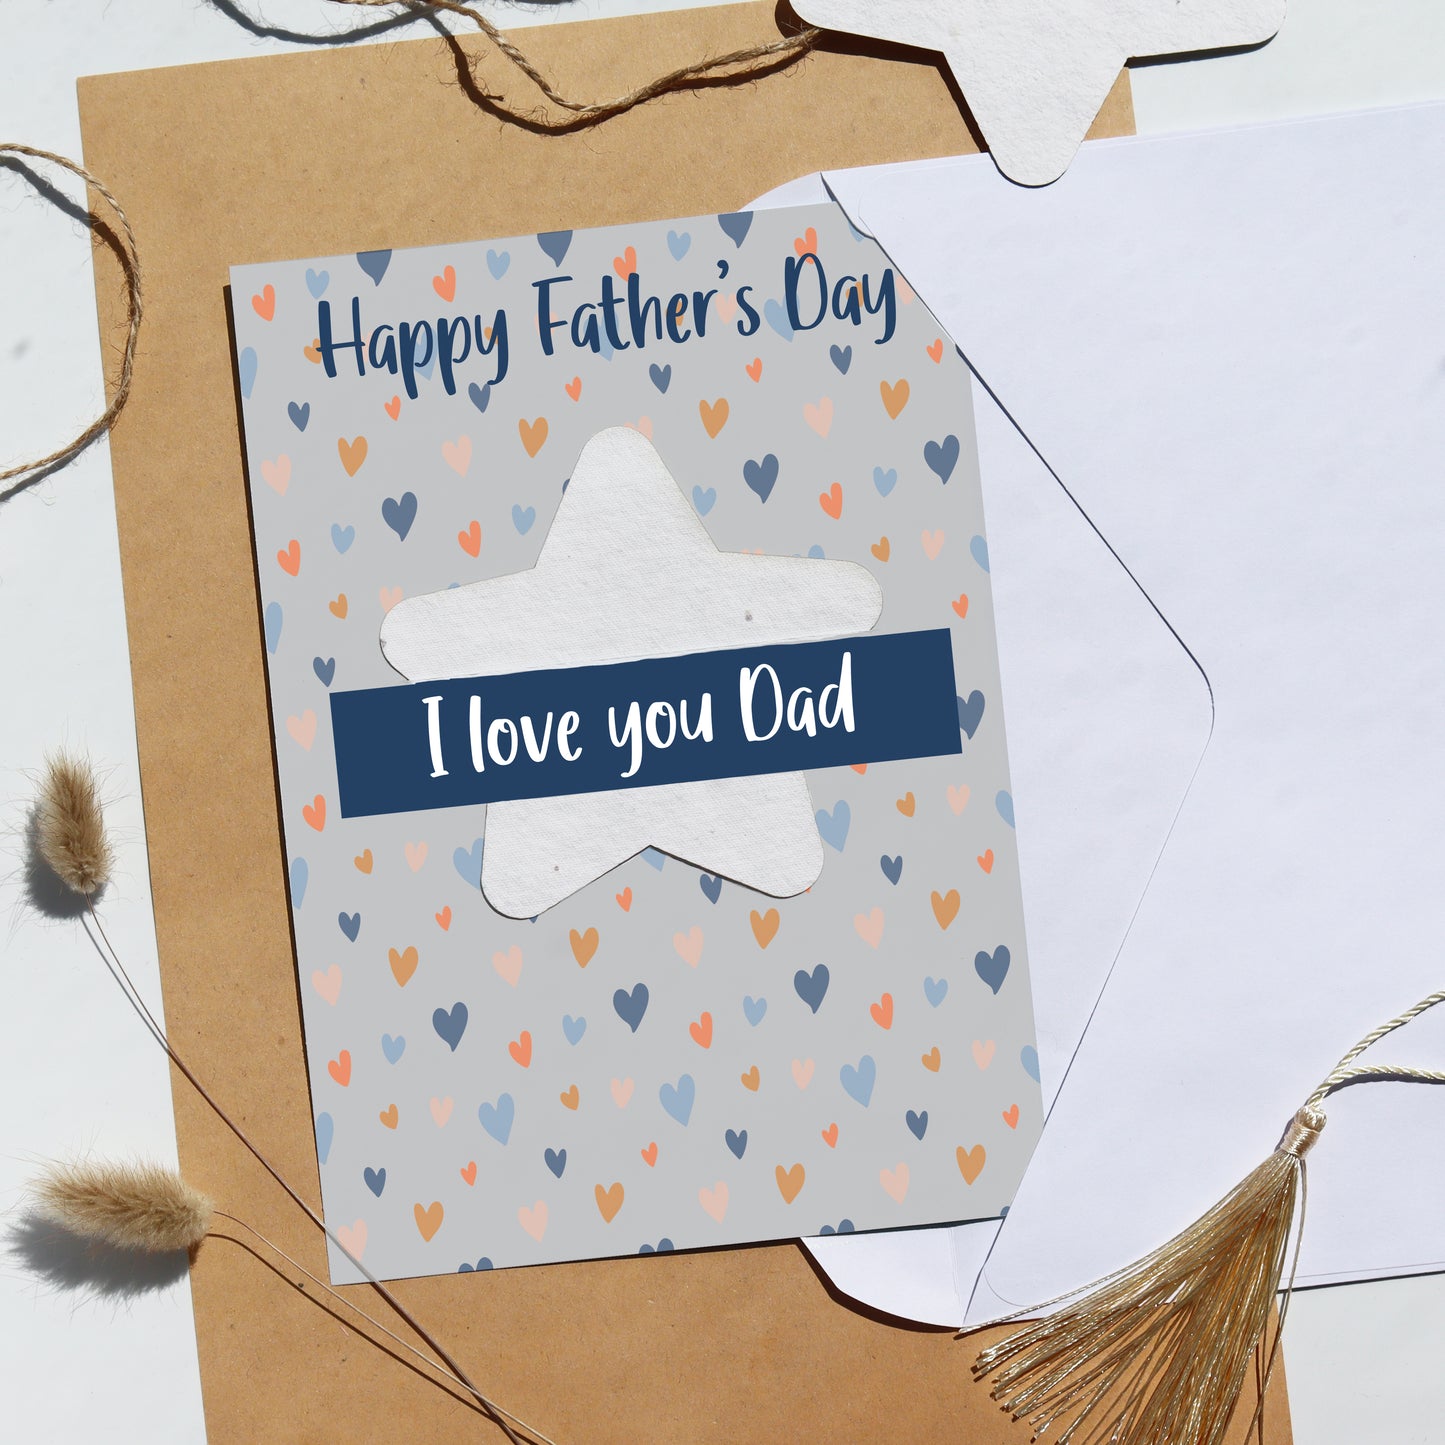 Plant A Star Father's Day Card